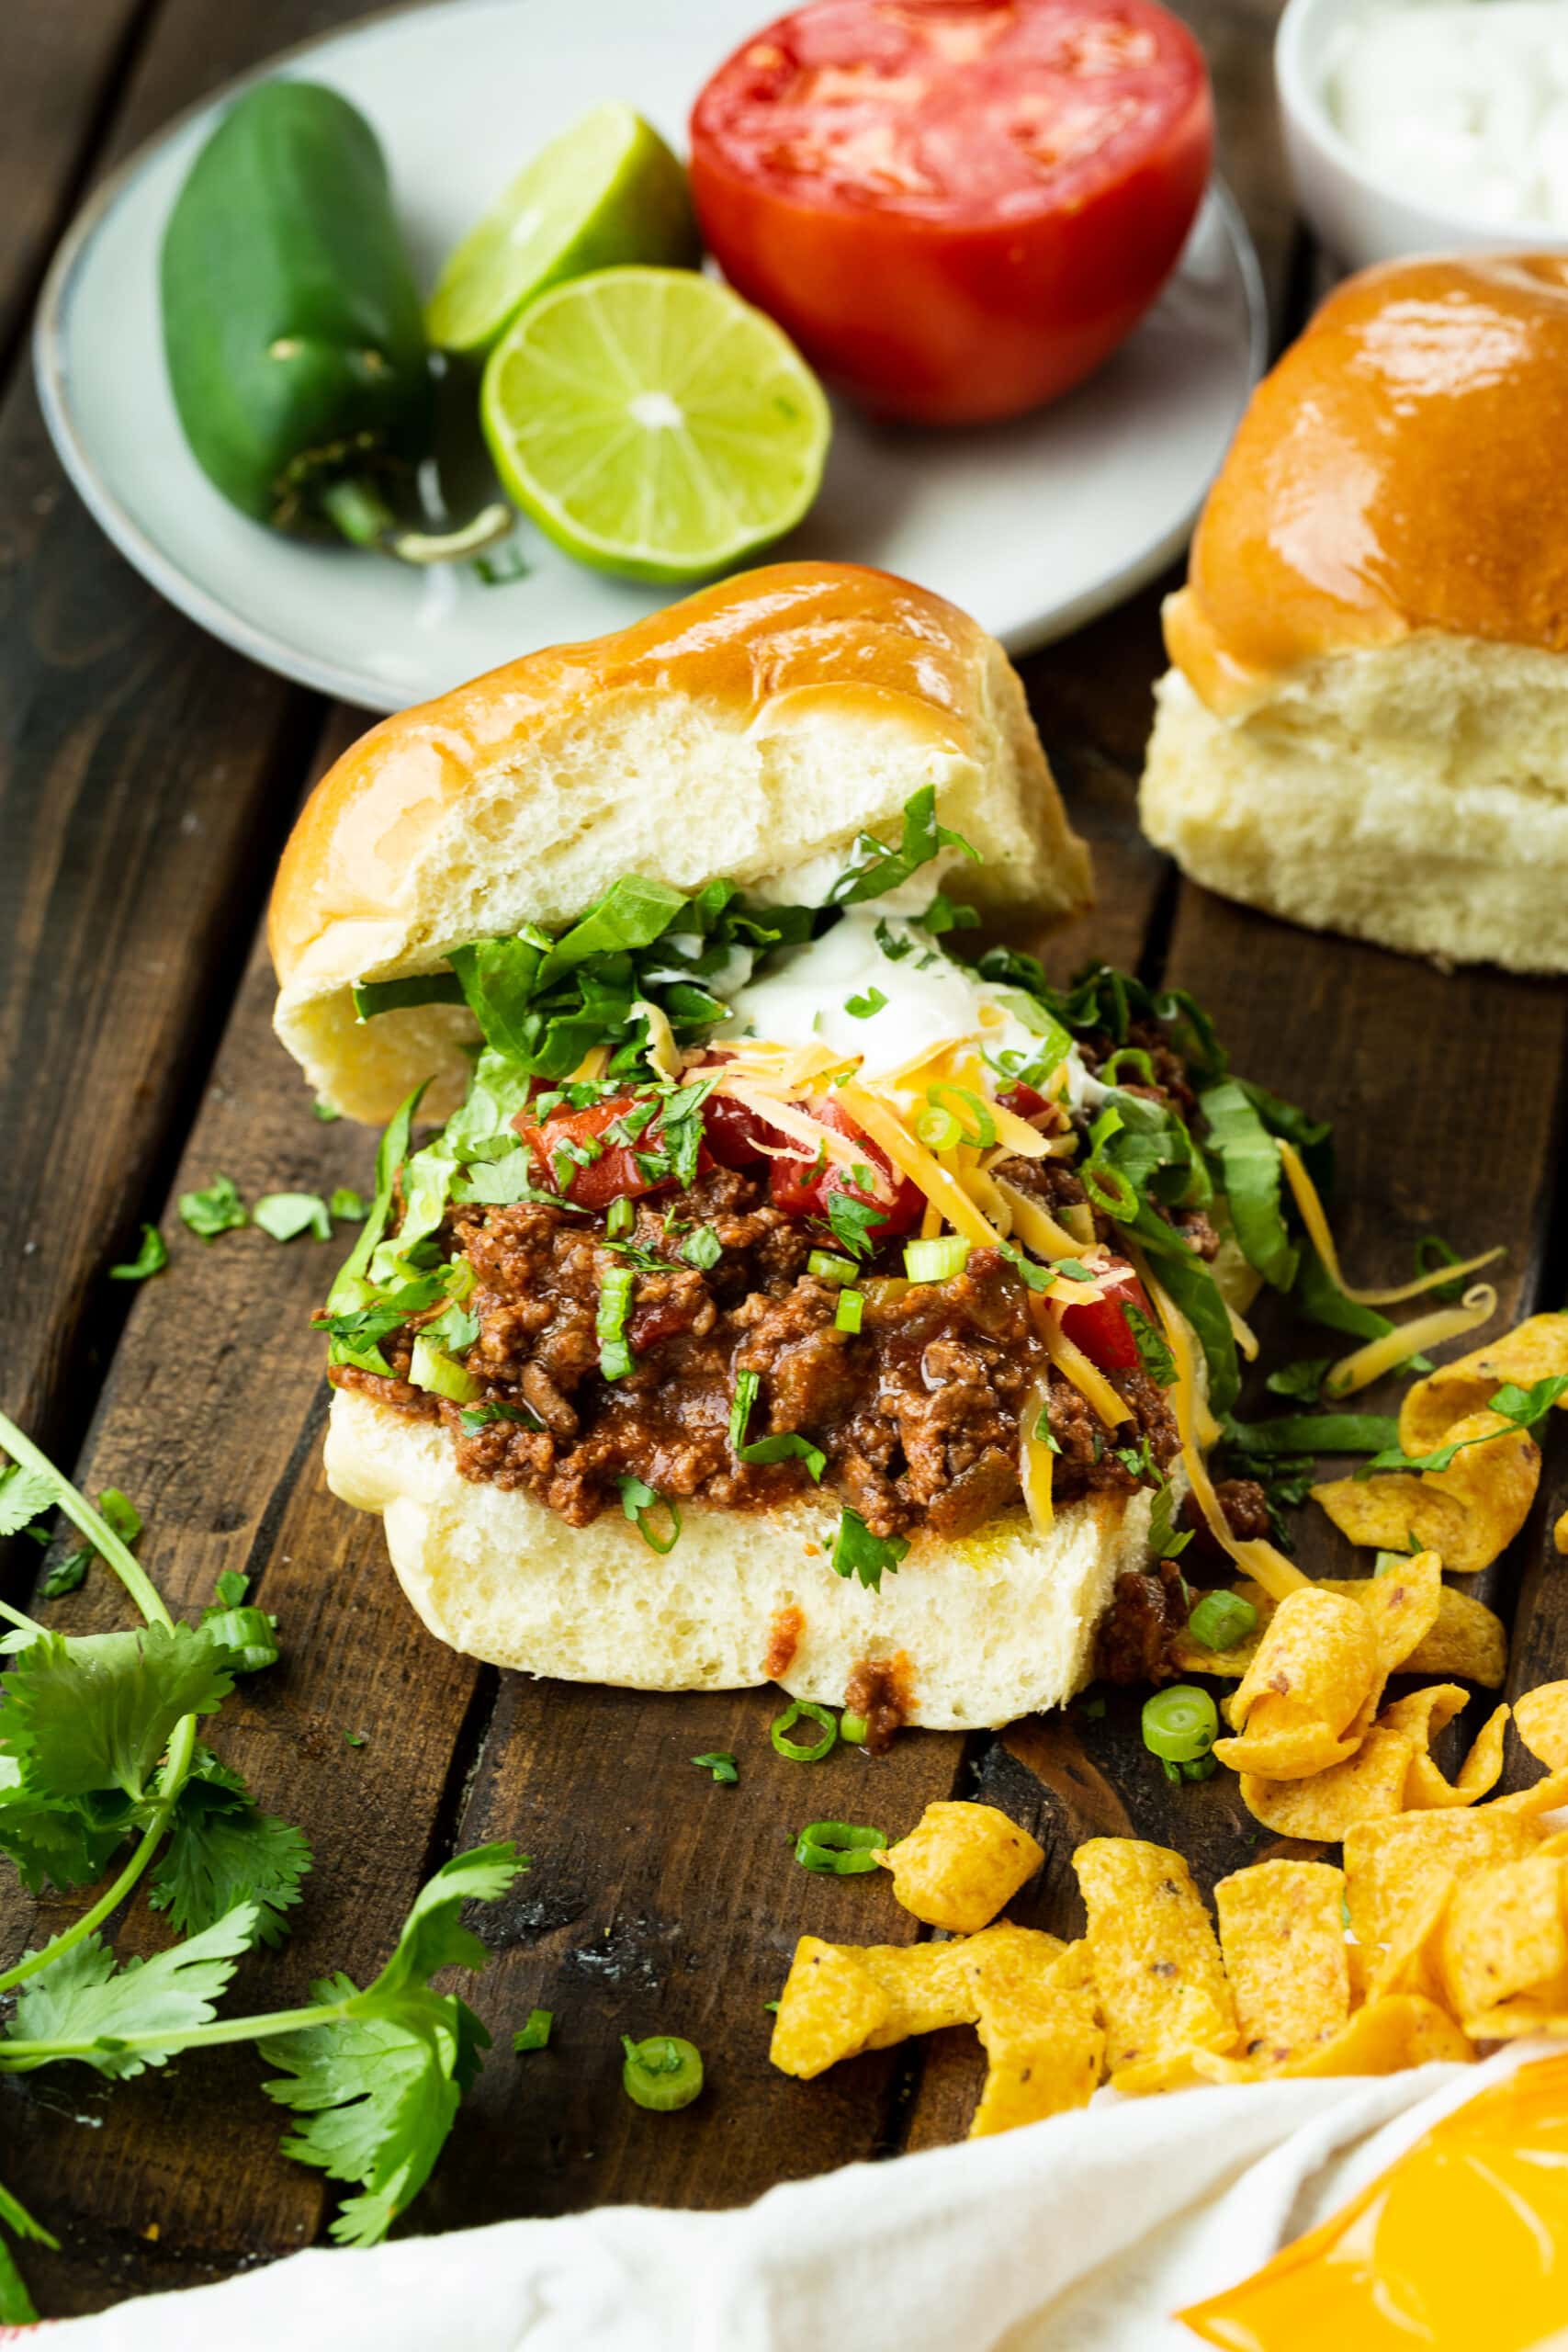 a photo of a hamburger bun piled high with juicy taco meat topped with shredded lettuce, sour cream, shredded cheddar cheese, sliced green onions and diced tomatoes with Fritos scattered around the sandwich.